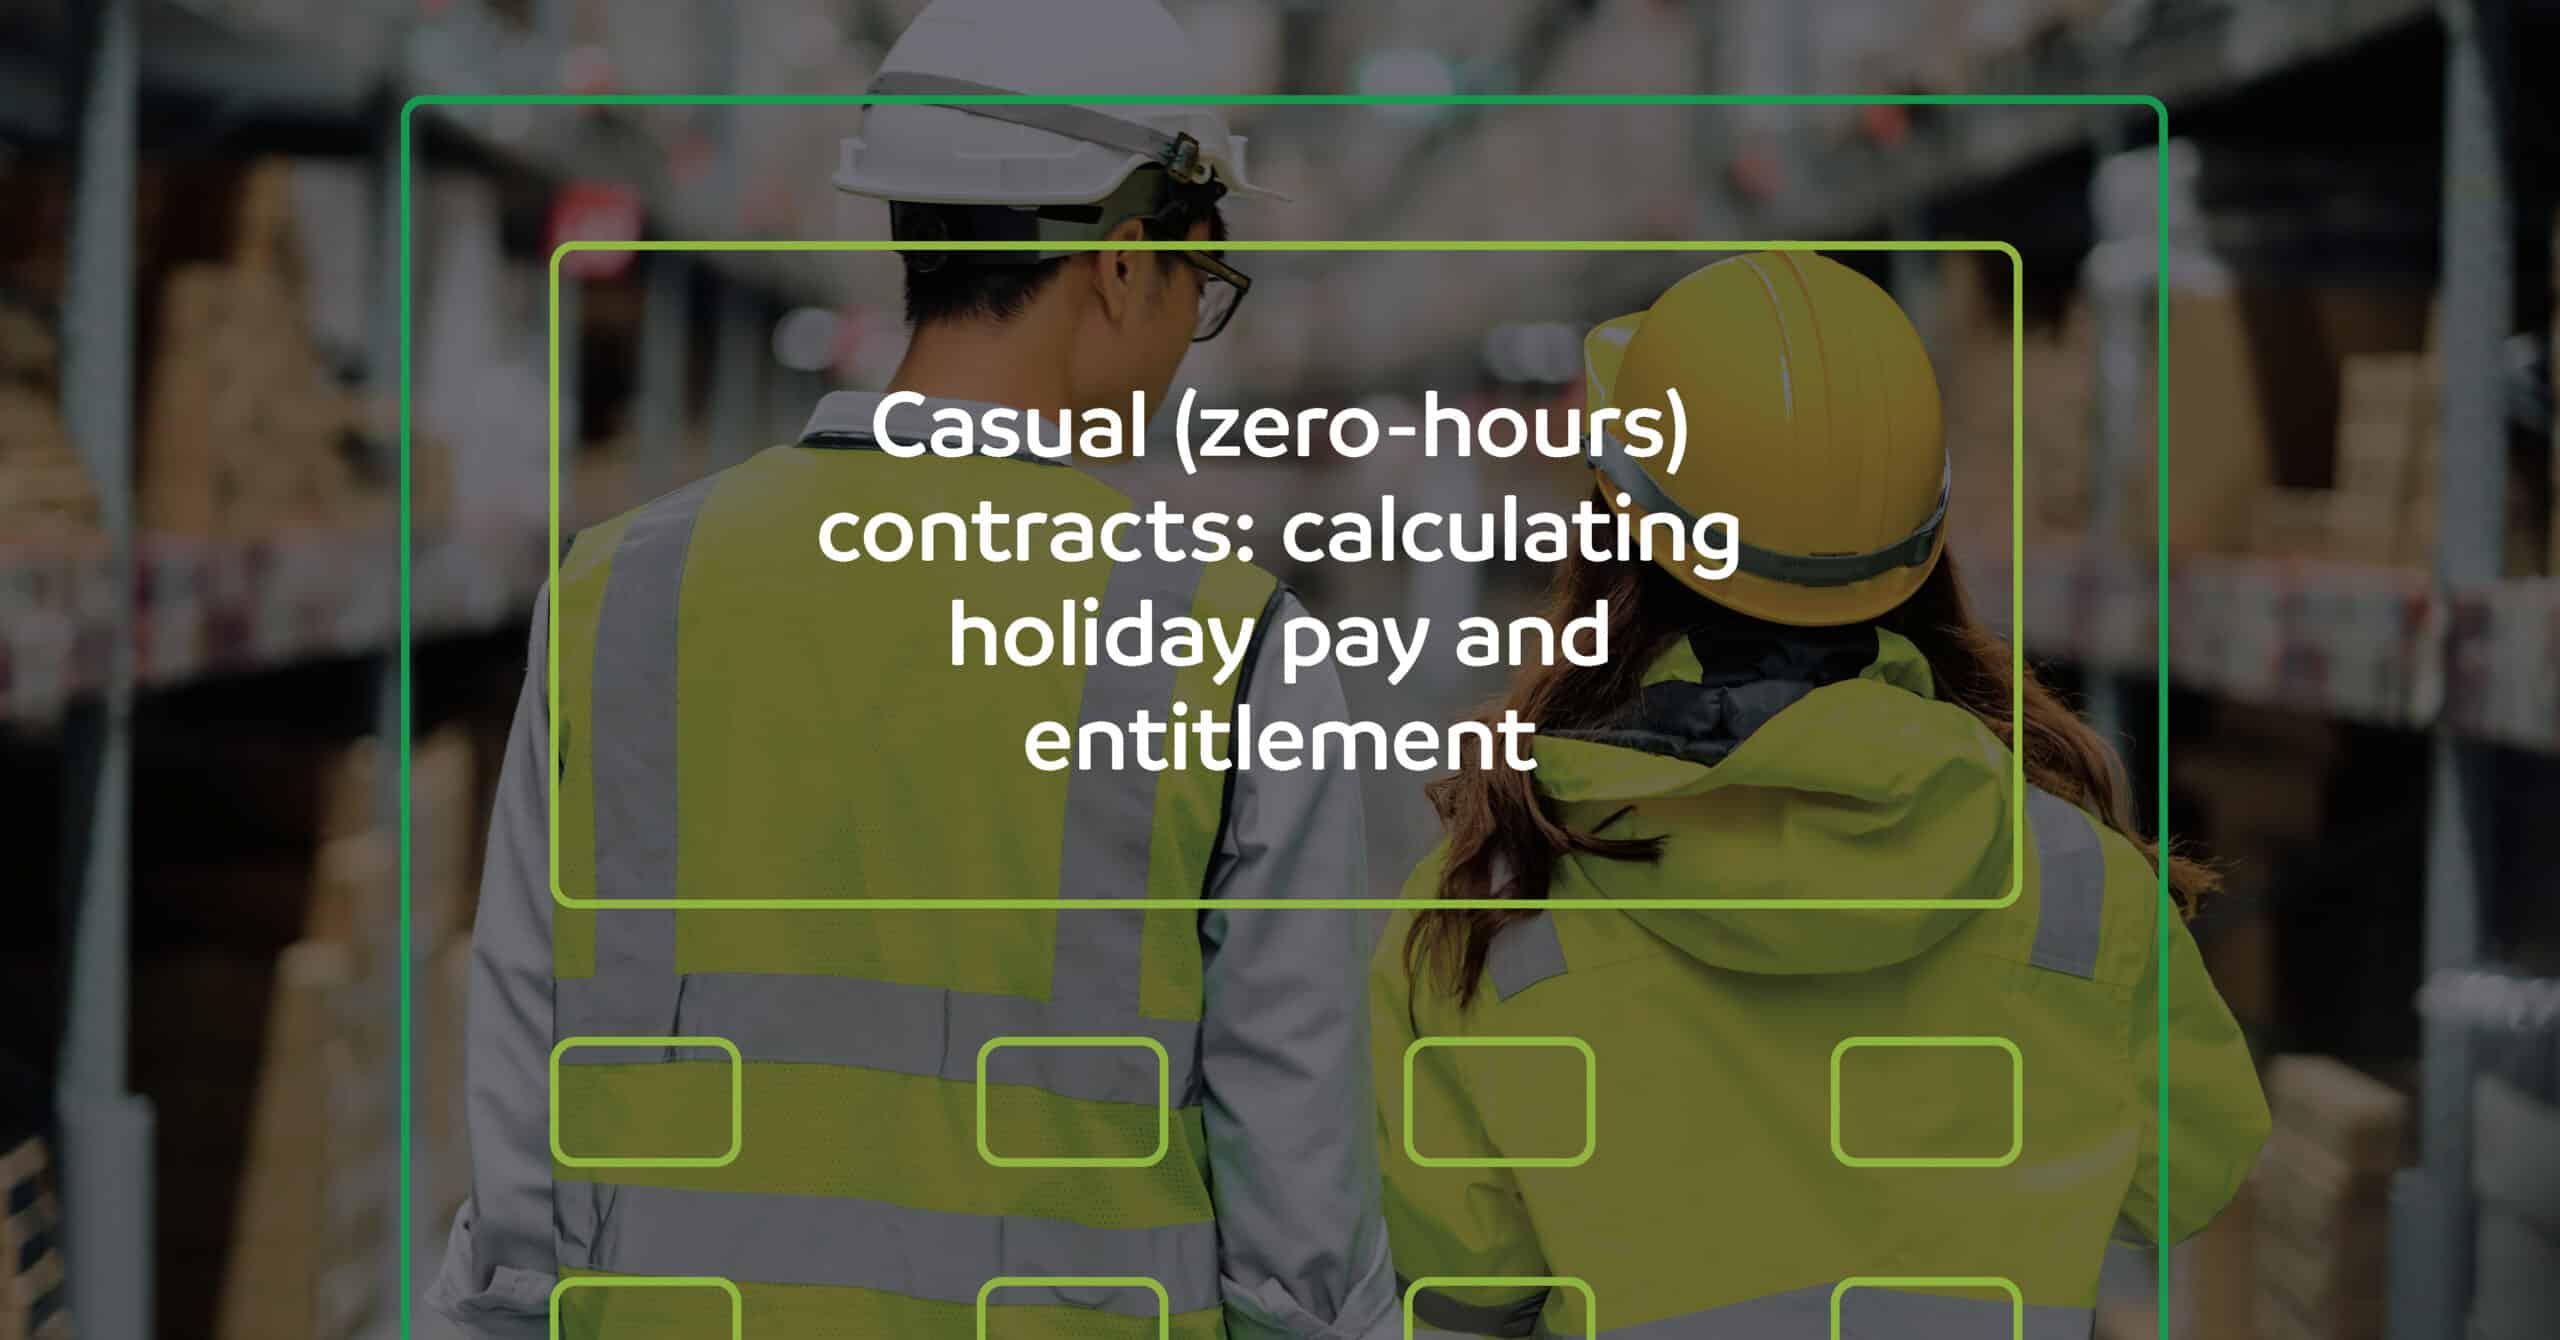 Casual (zero-hours) contracts: calculating holiday pay entitlement